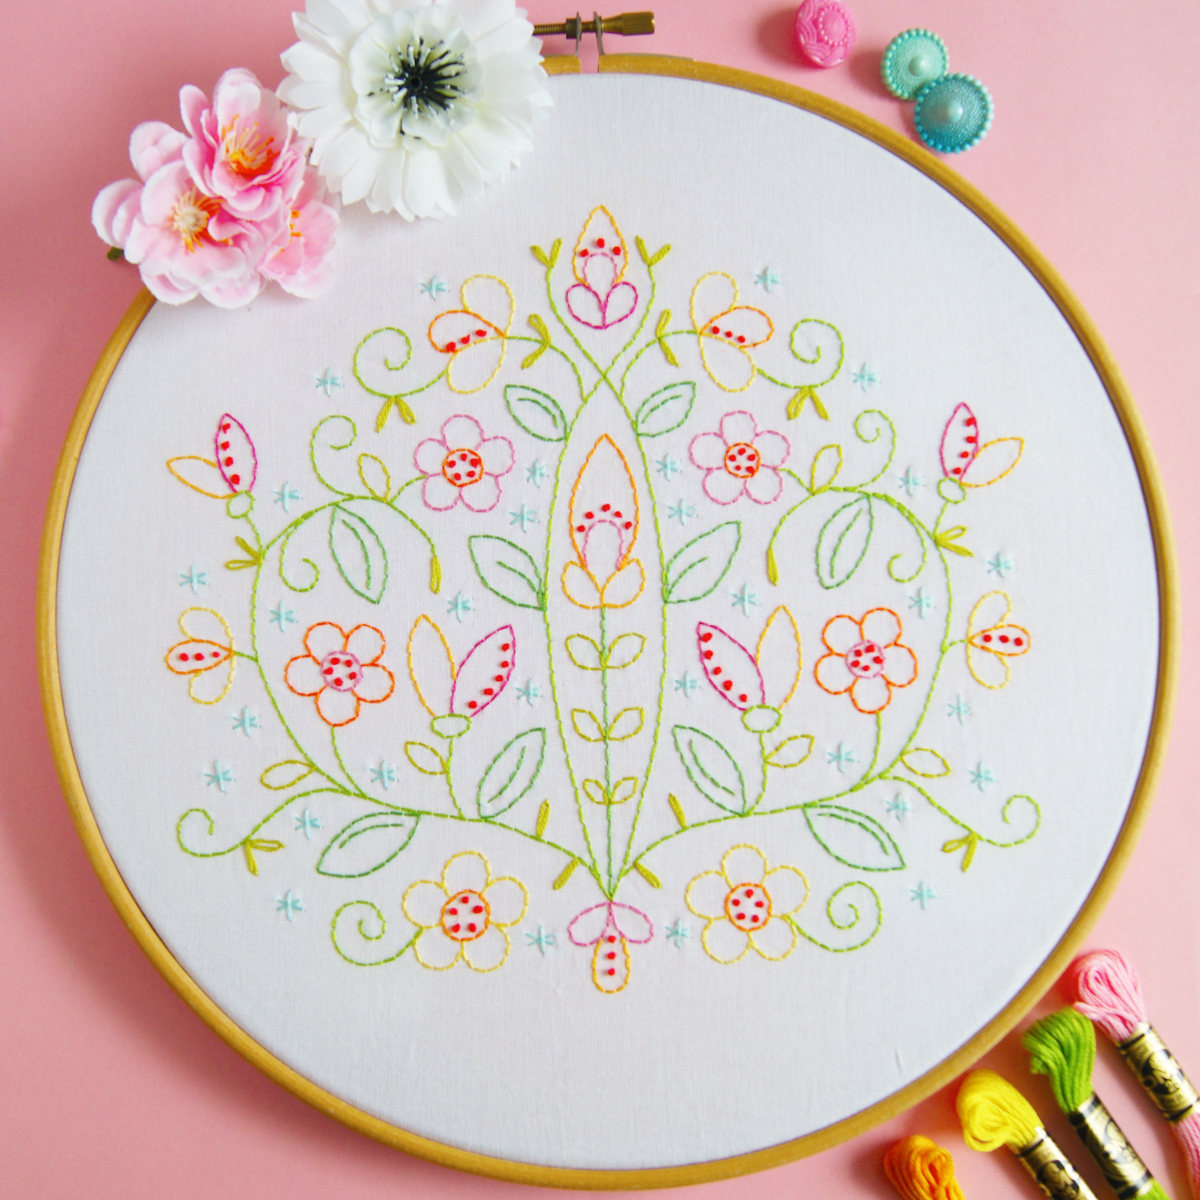 Flower Embroidery Patterns May Flowers Embroidery Pattern Polka Bloom